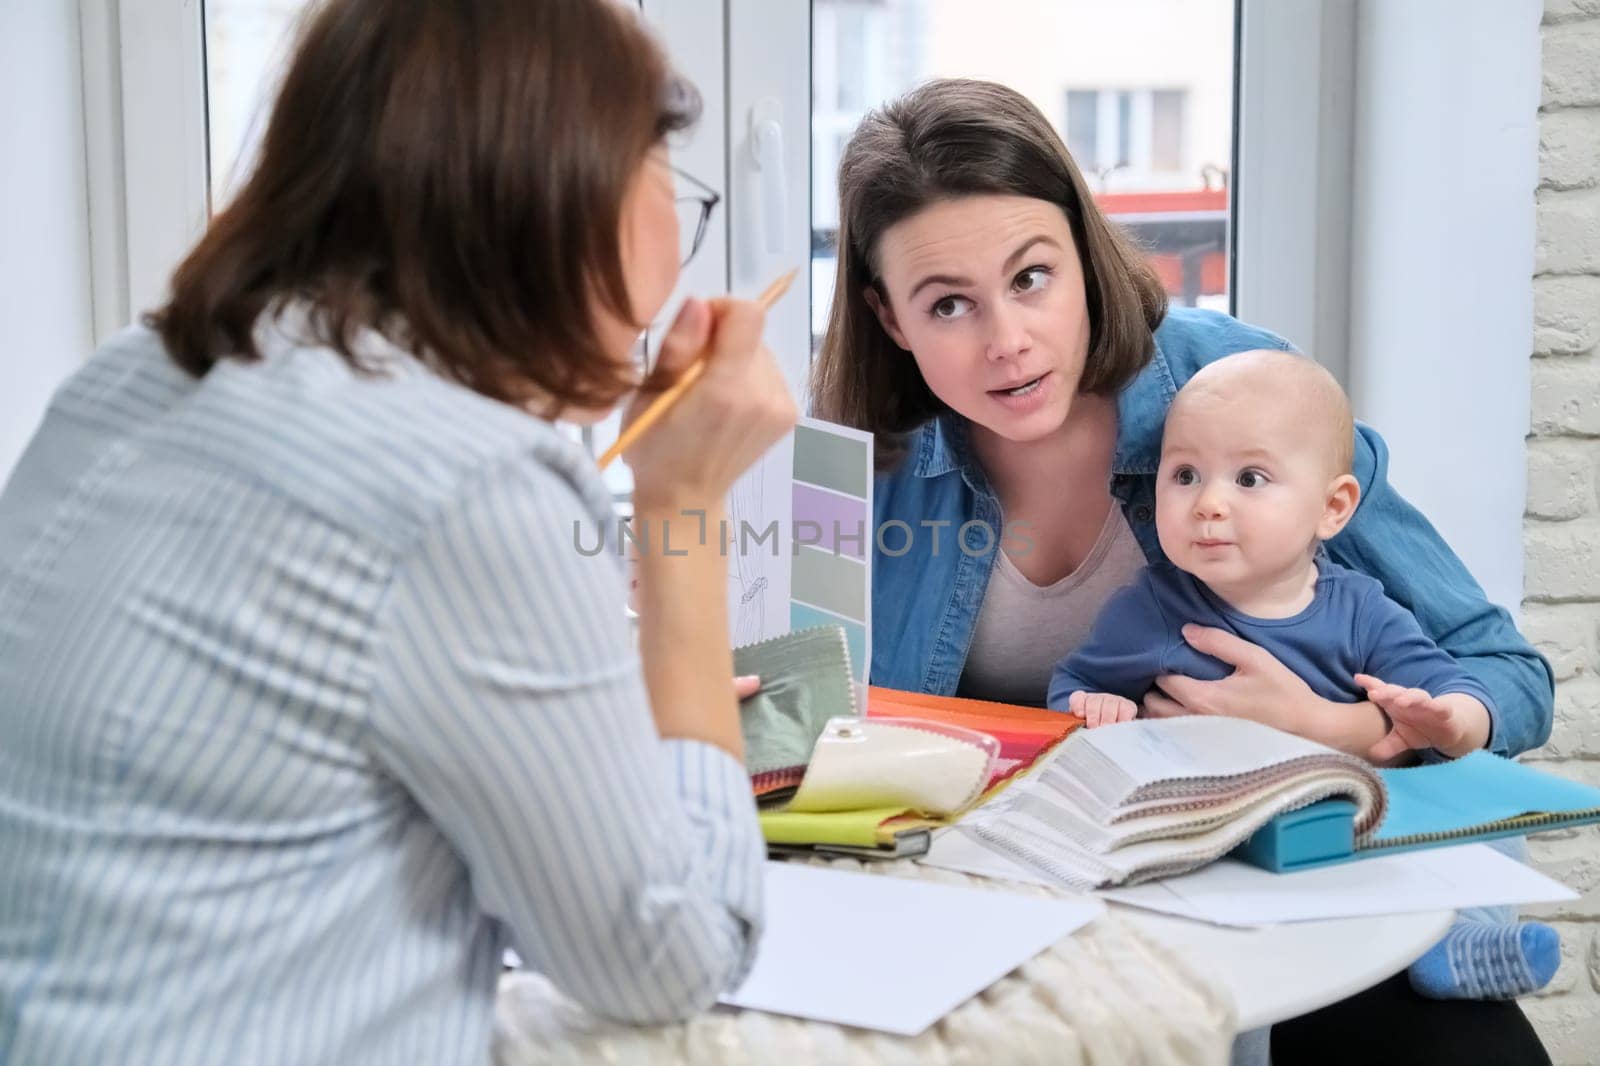 Women interior designer and client with baby choosing fabrics and materials.